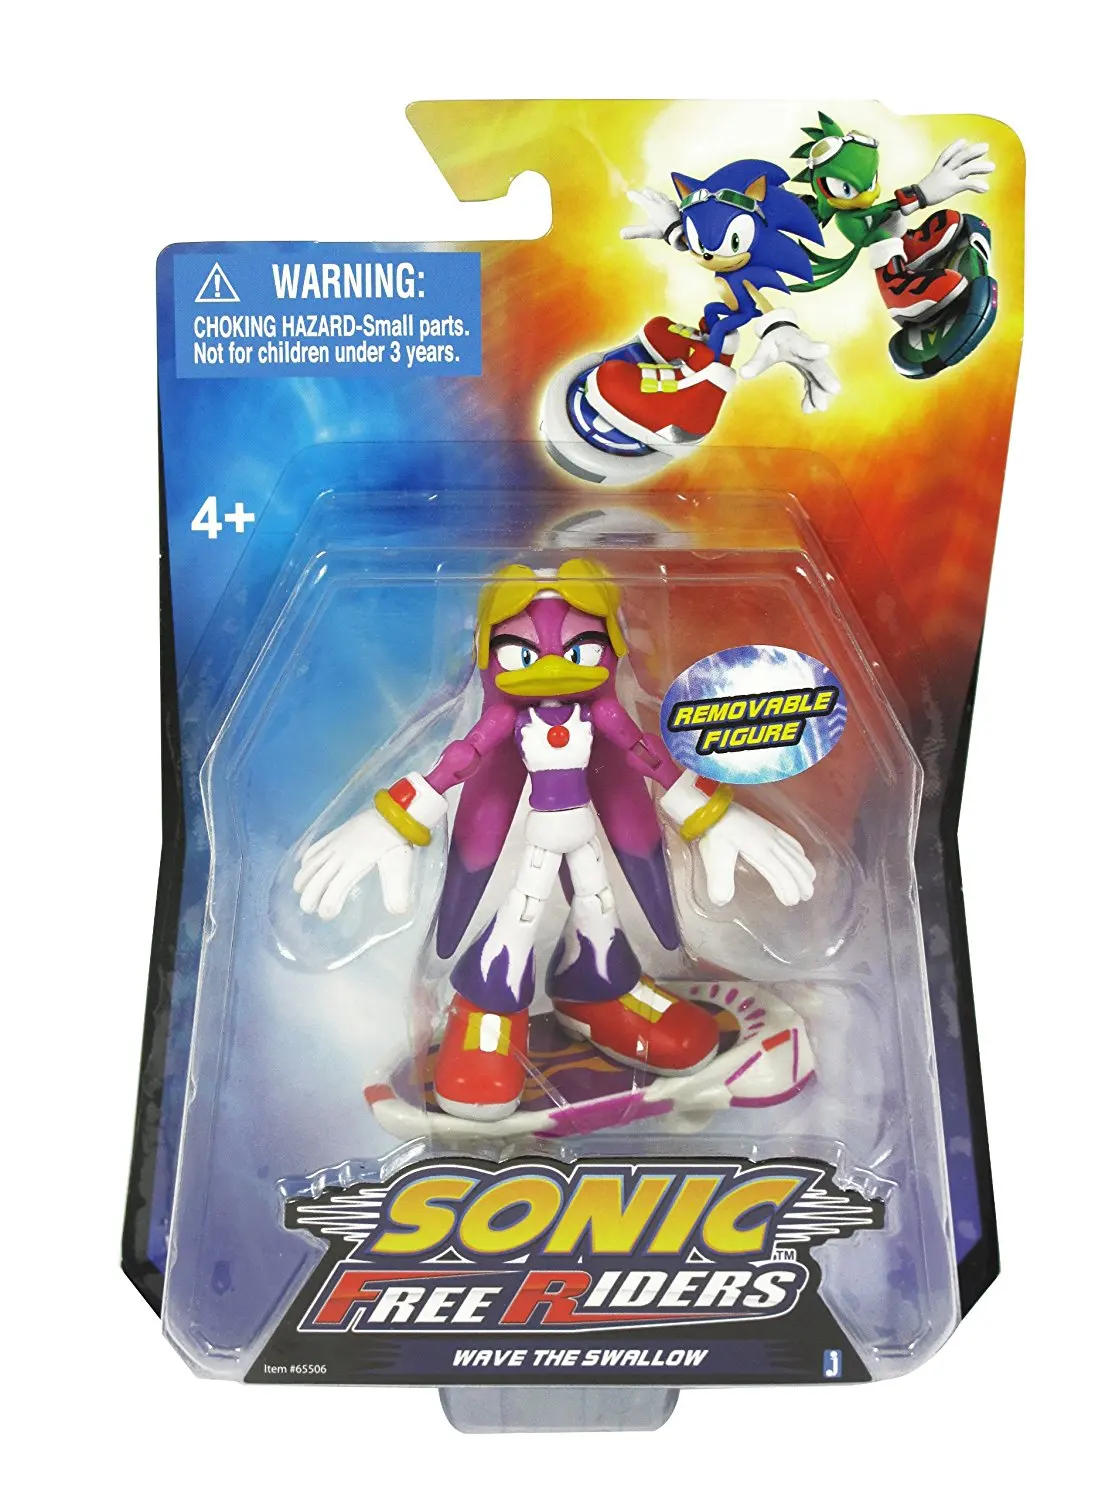 Buy Sonic Wave Free Riders Action Figure in Cheap Price on Alibaba.com